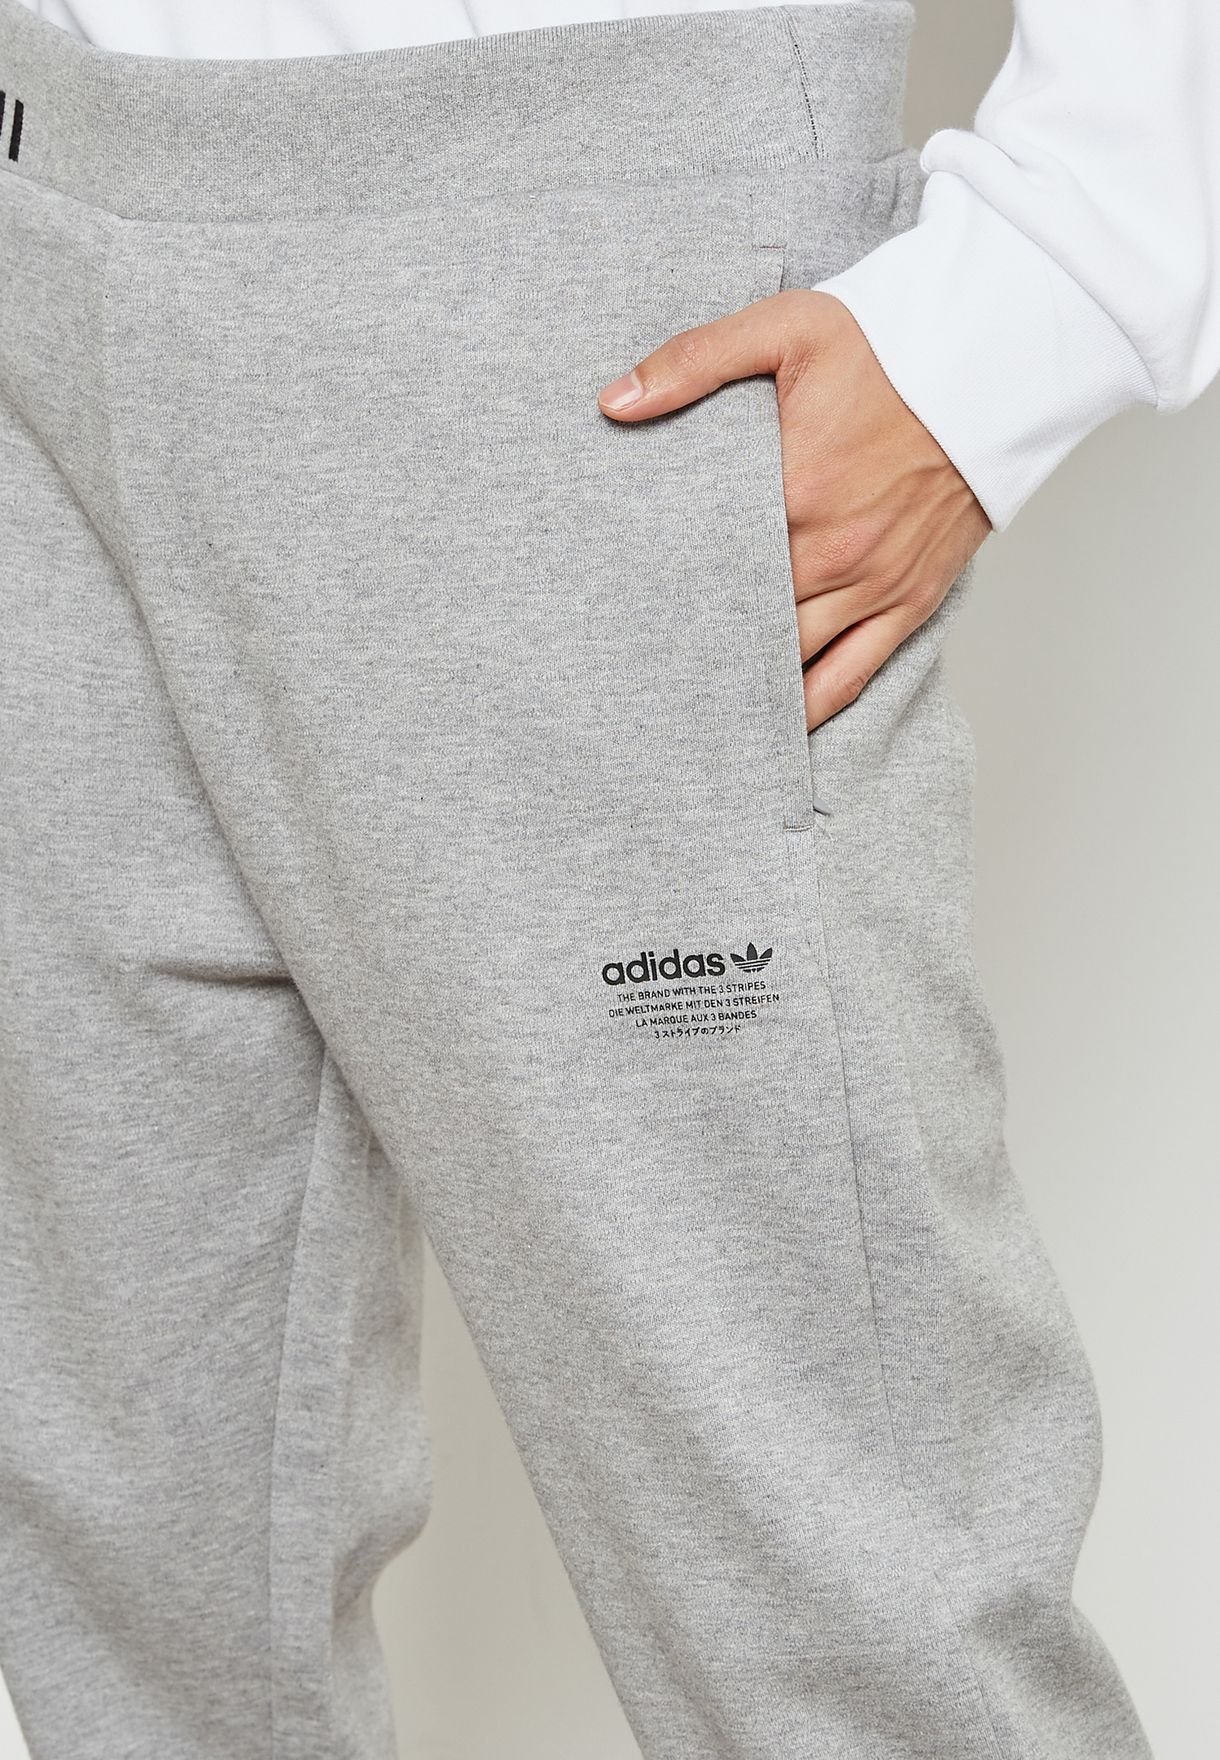 the brand with the three stripes sweatpants